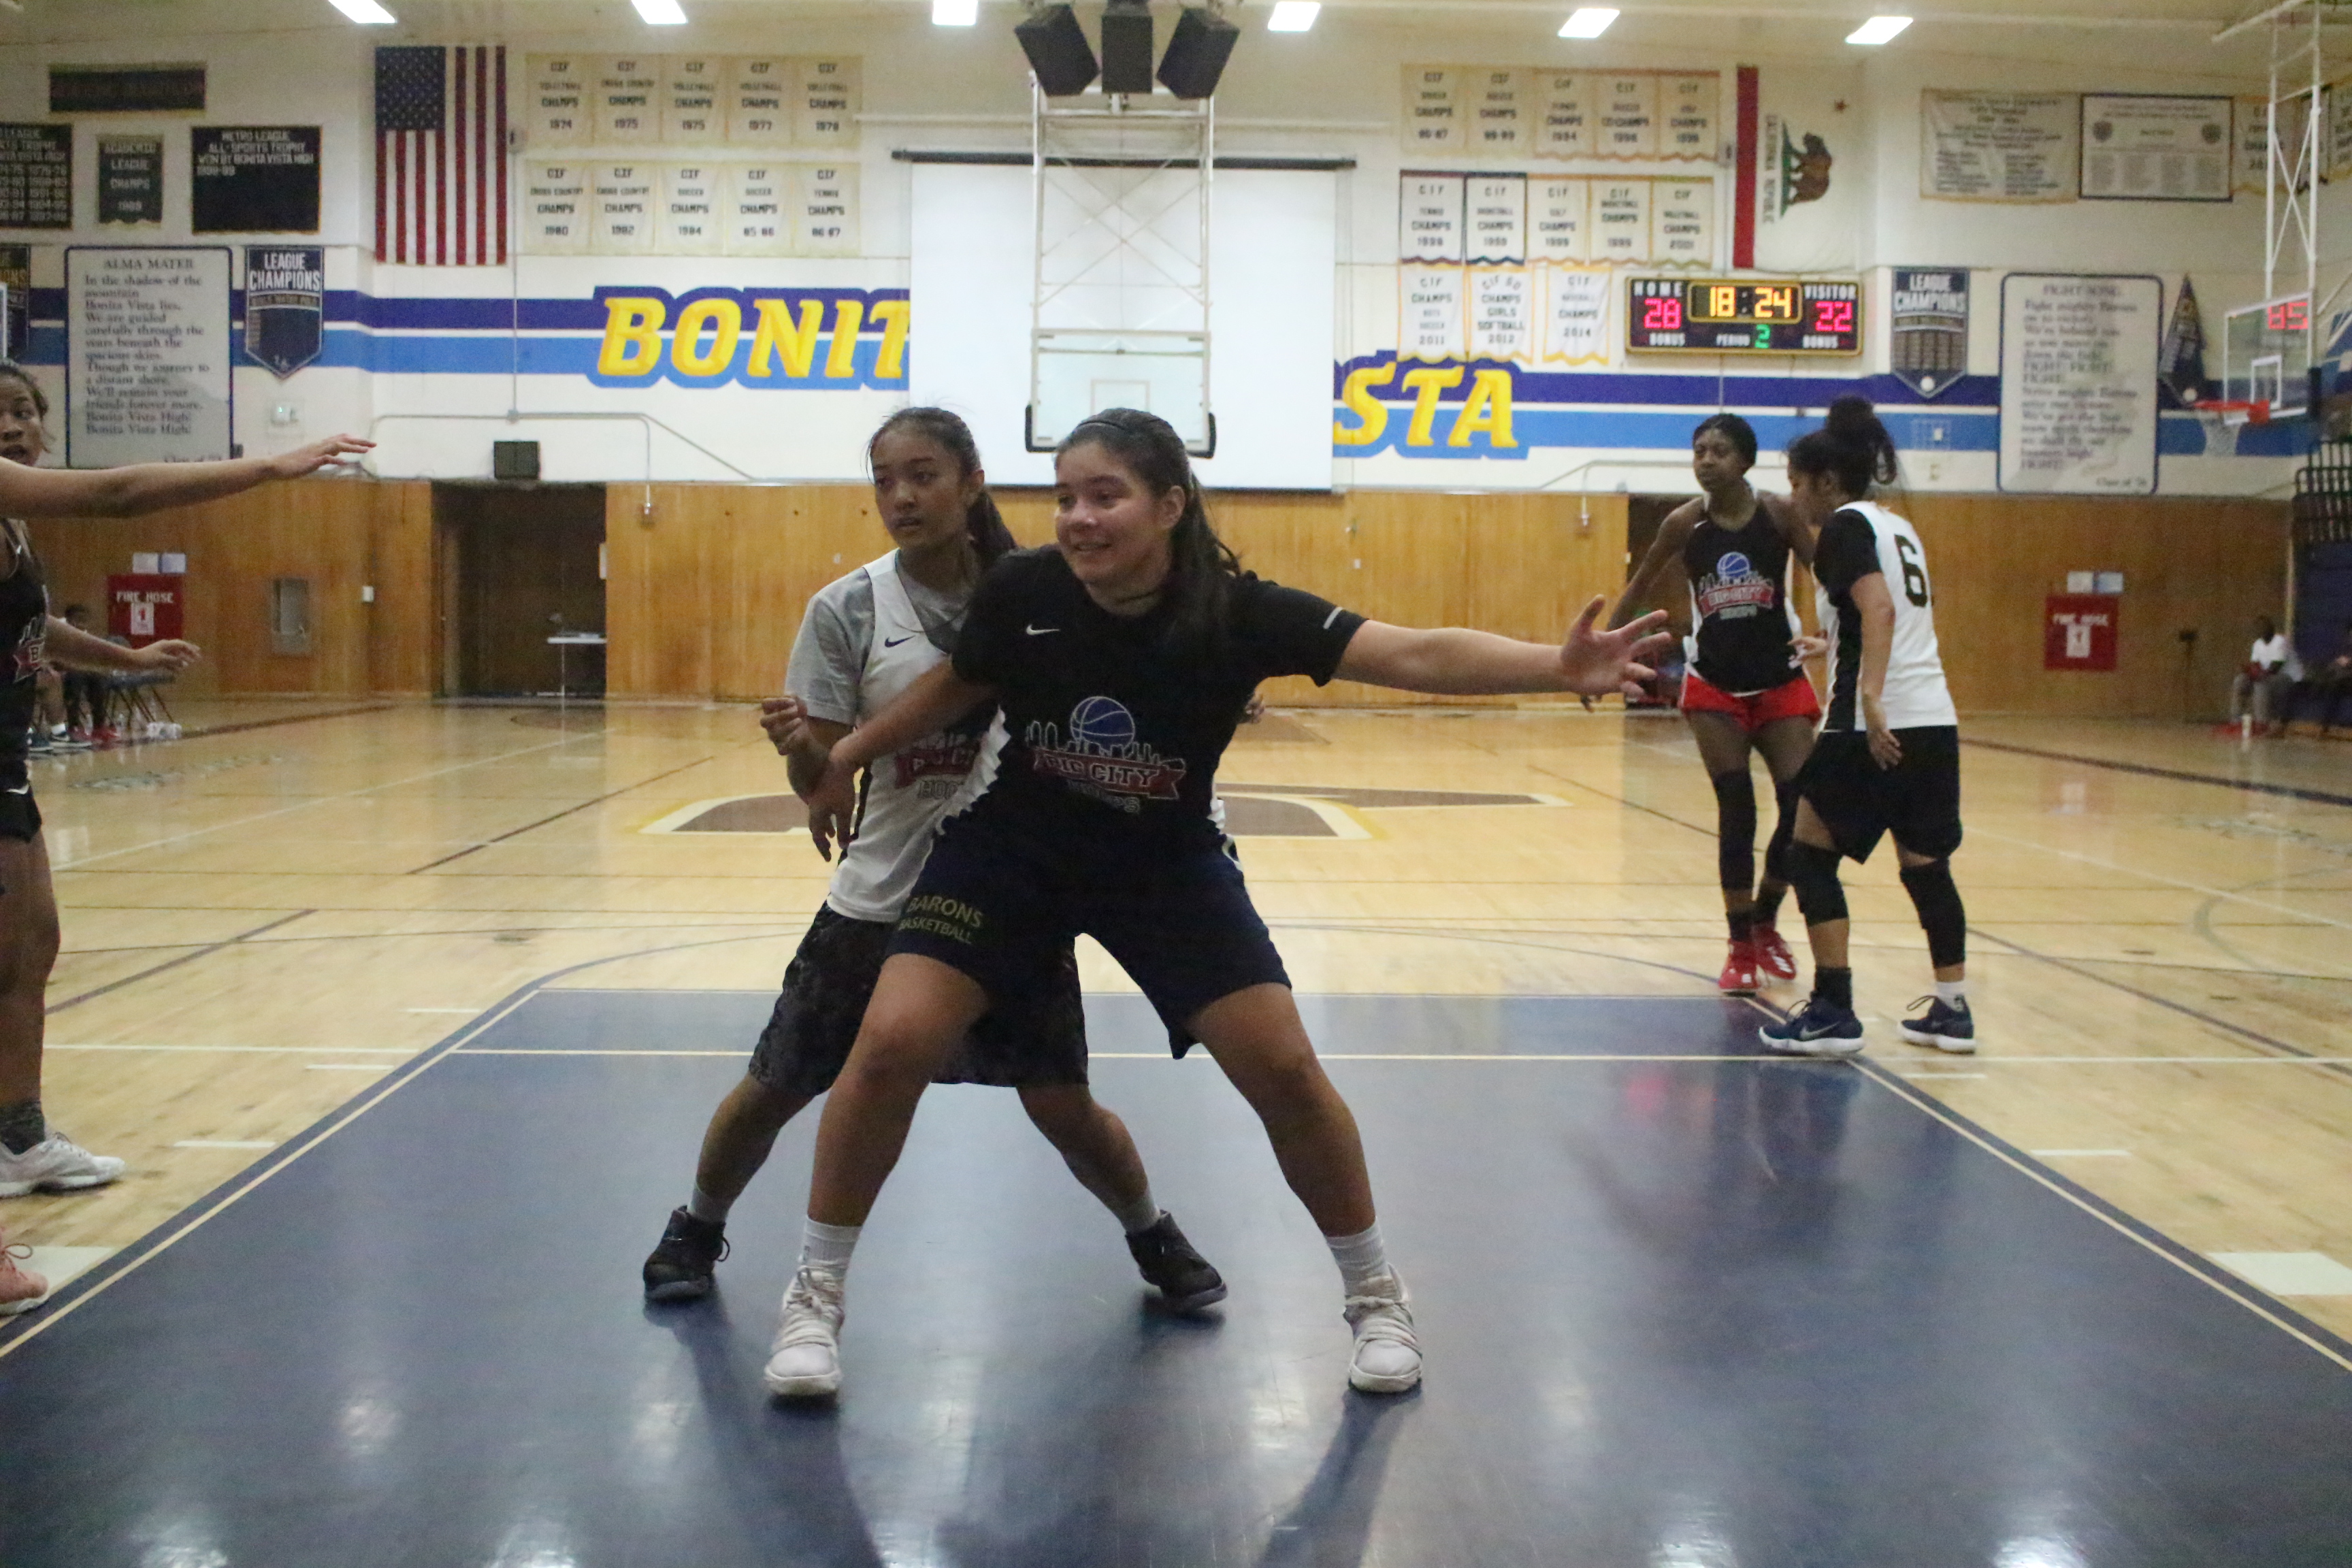 Two girls are playing basketball in a gym.